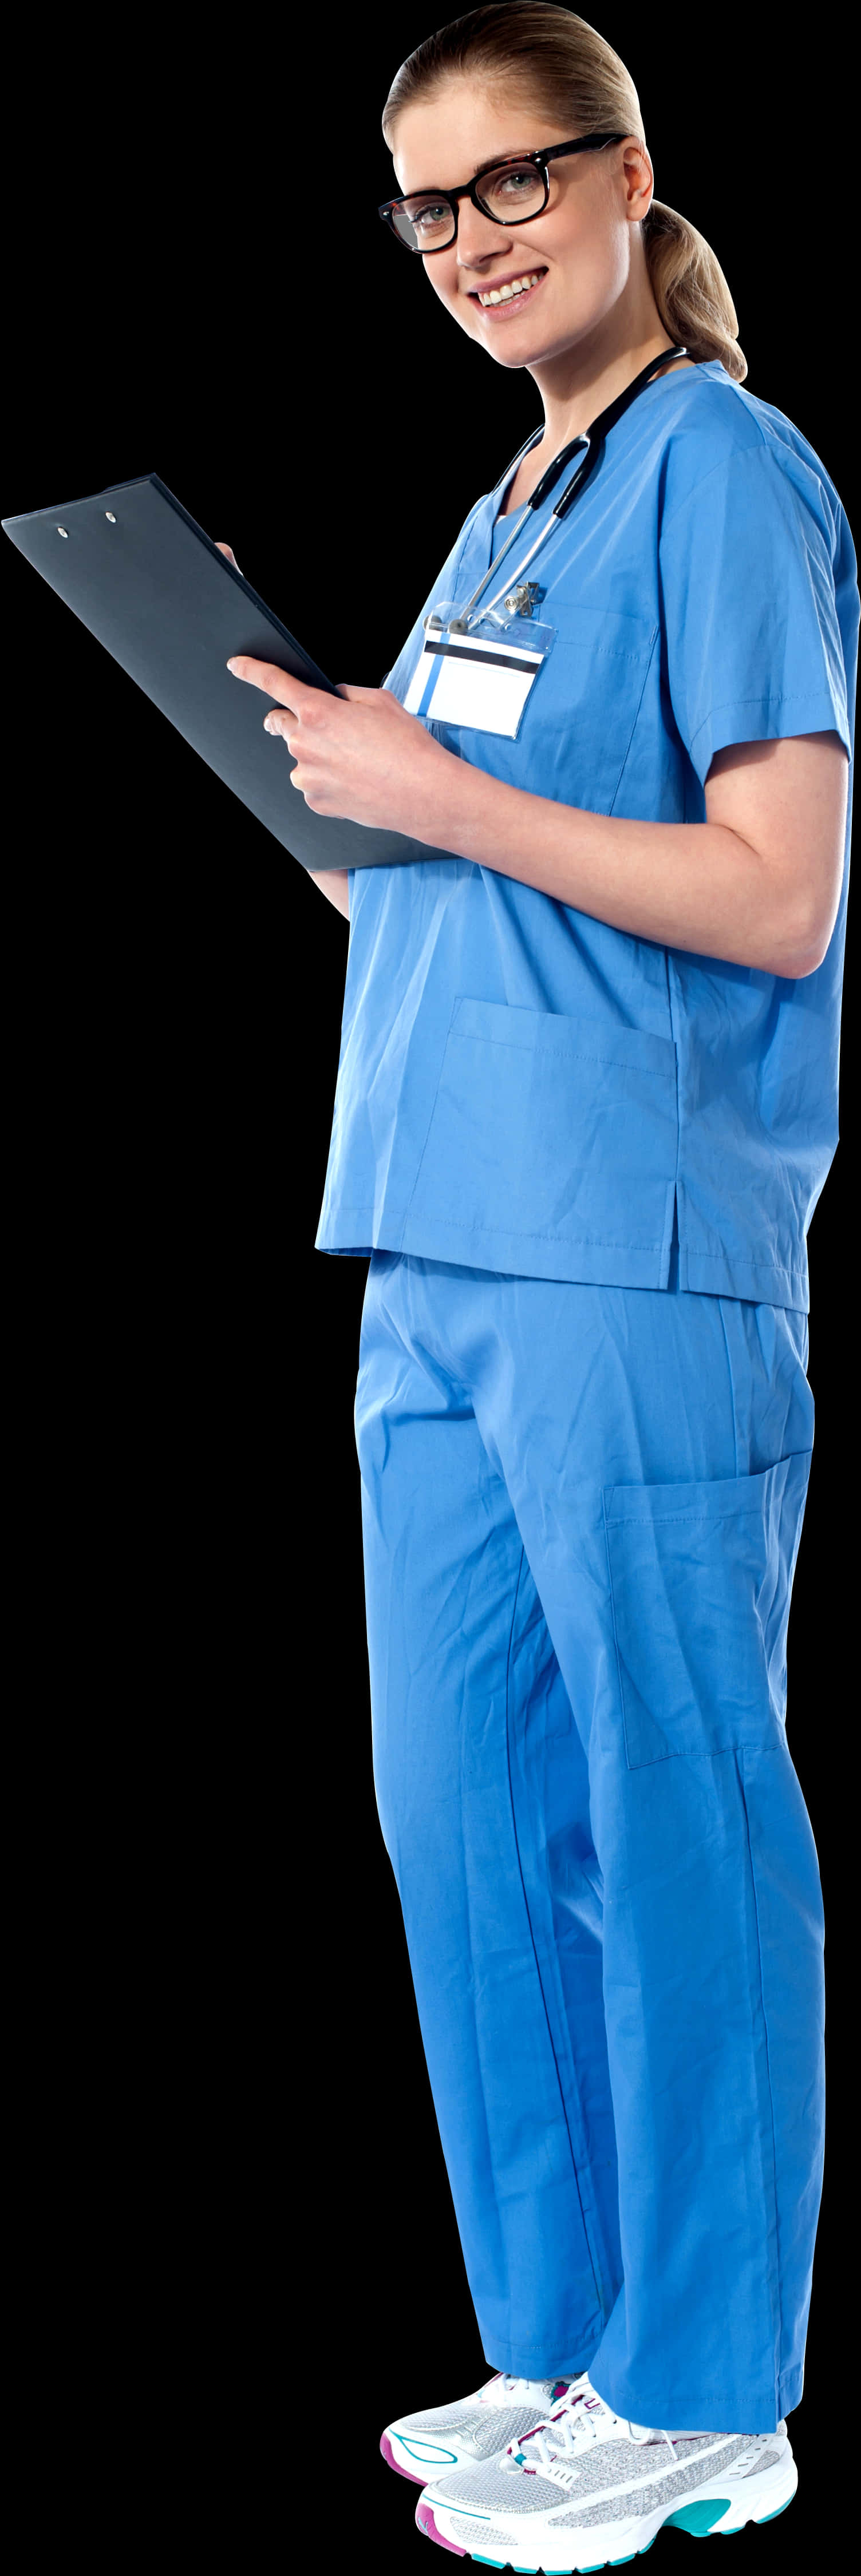 Smiling Female Doctorwith Clipboard PNG